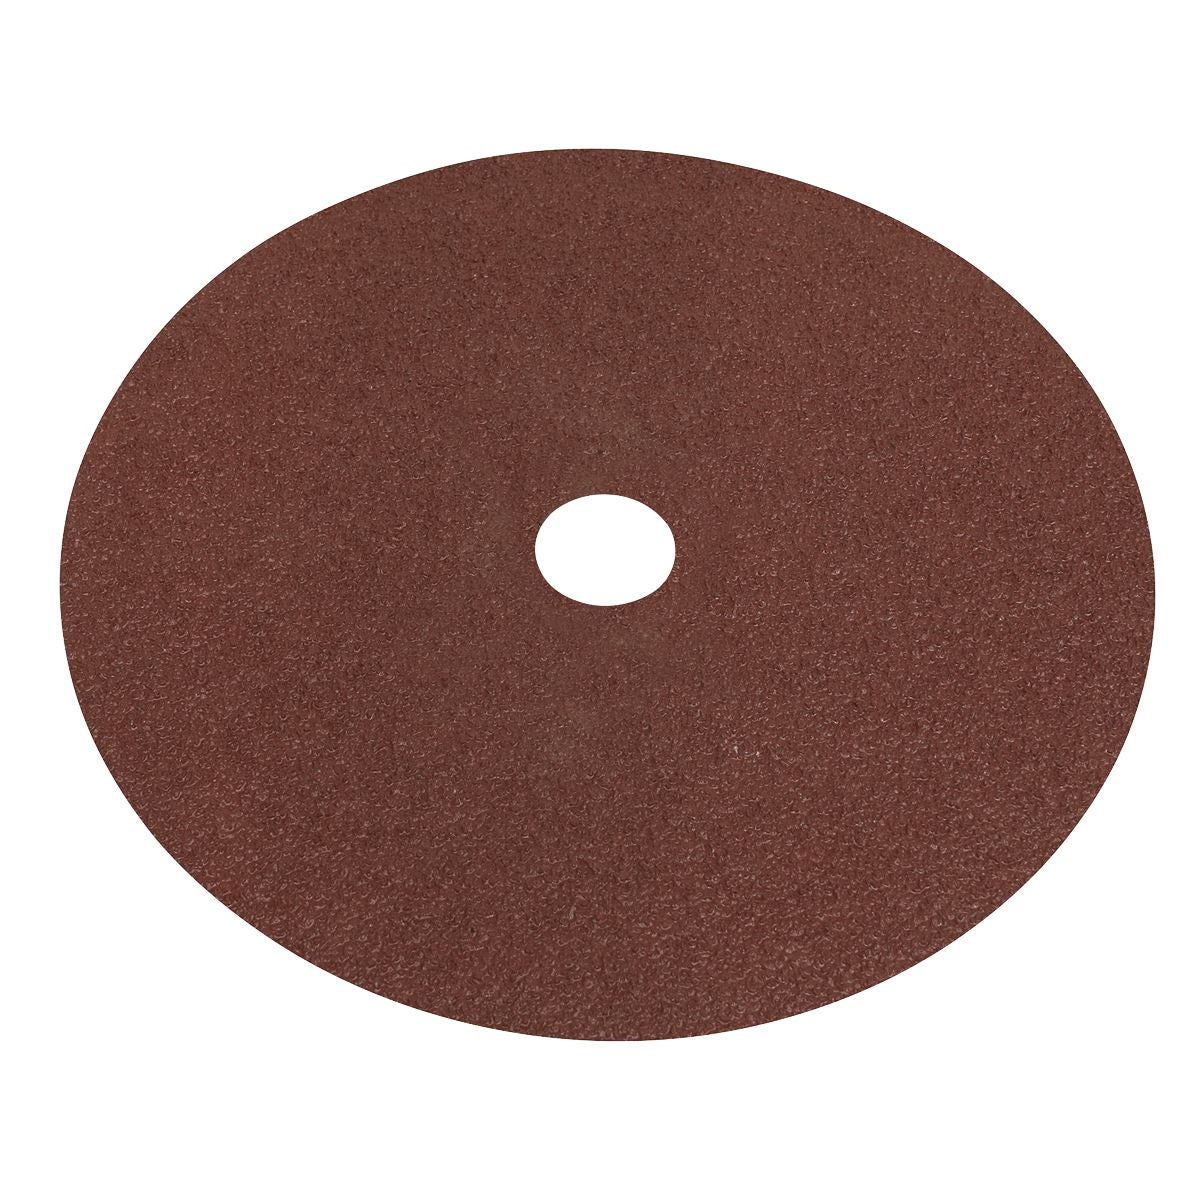 Worksafe by Sealey Fibre Backed Disc Ø175mm - 40Grit Pack of 25